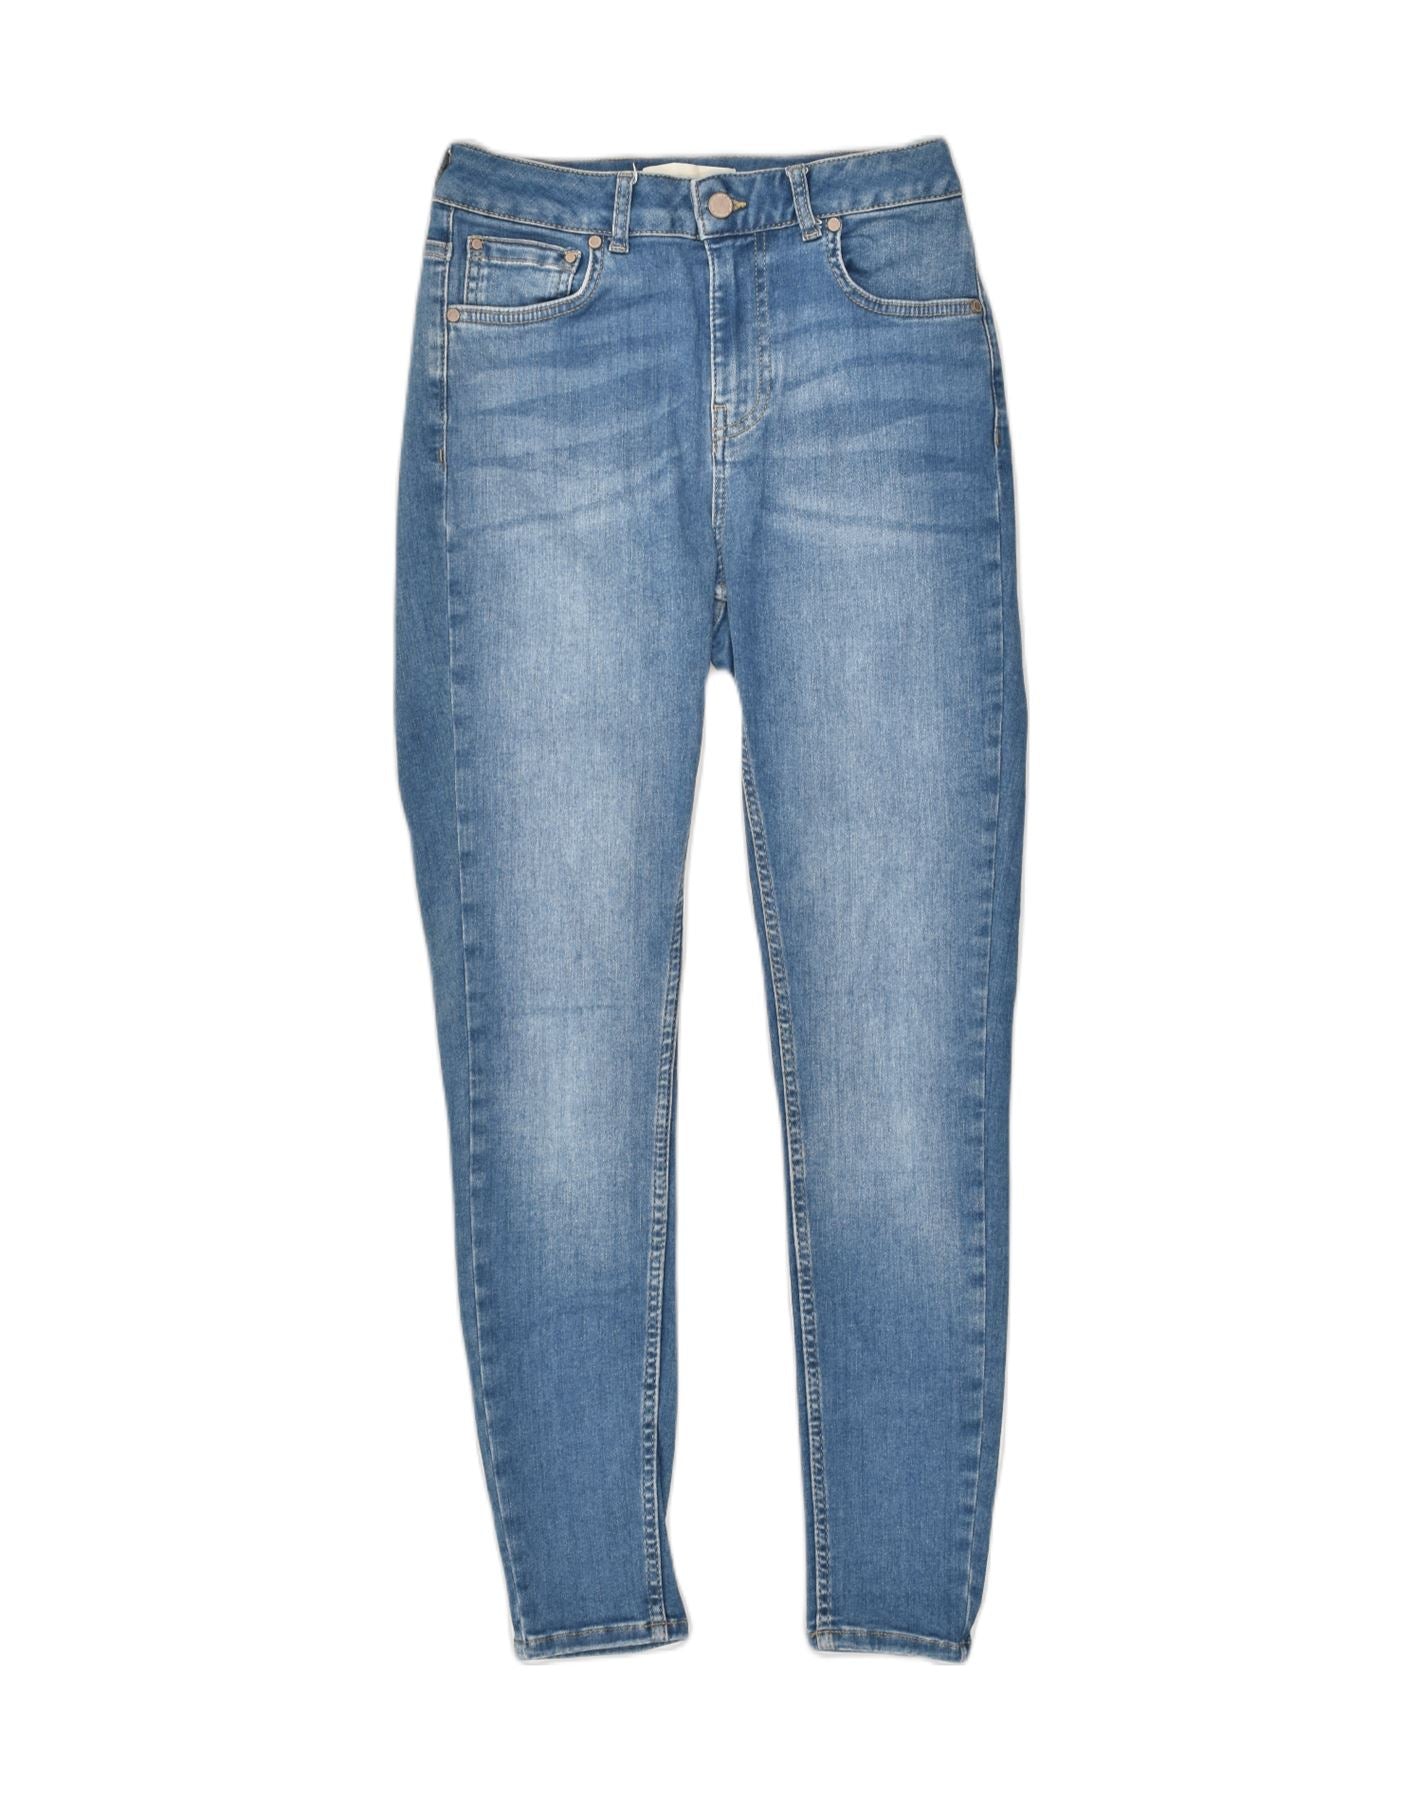 Buy Blue Trousers & Pants for Women by SUPERDRY Online